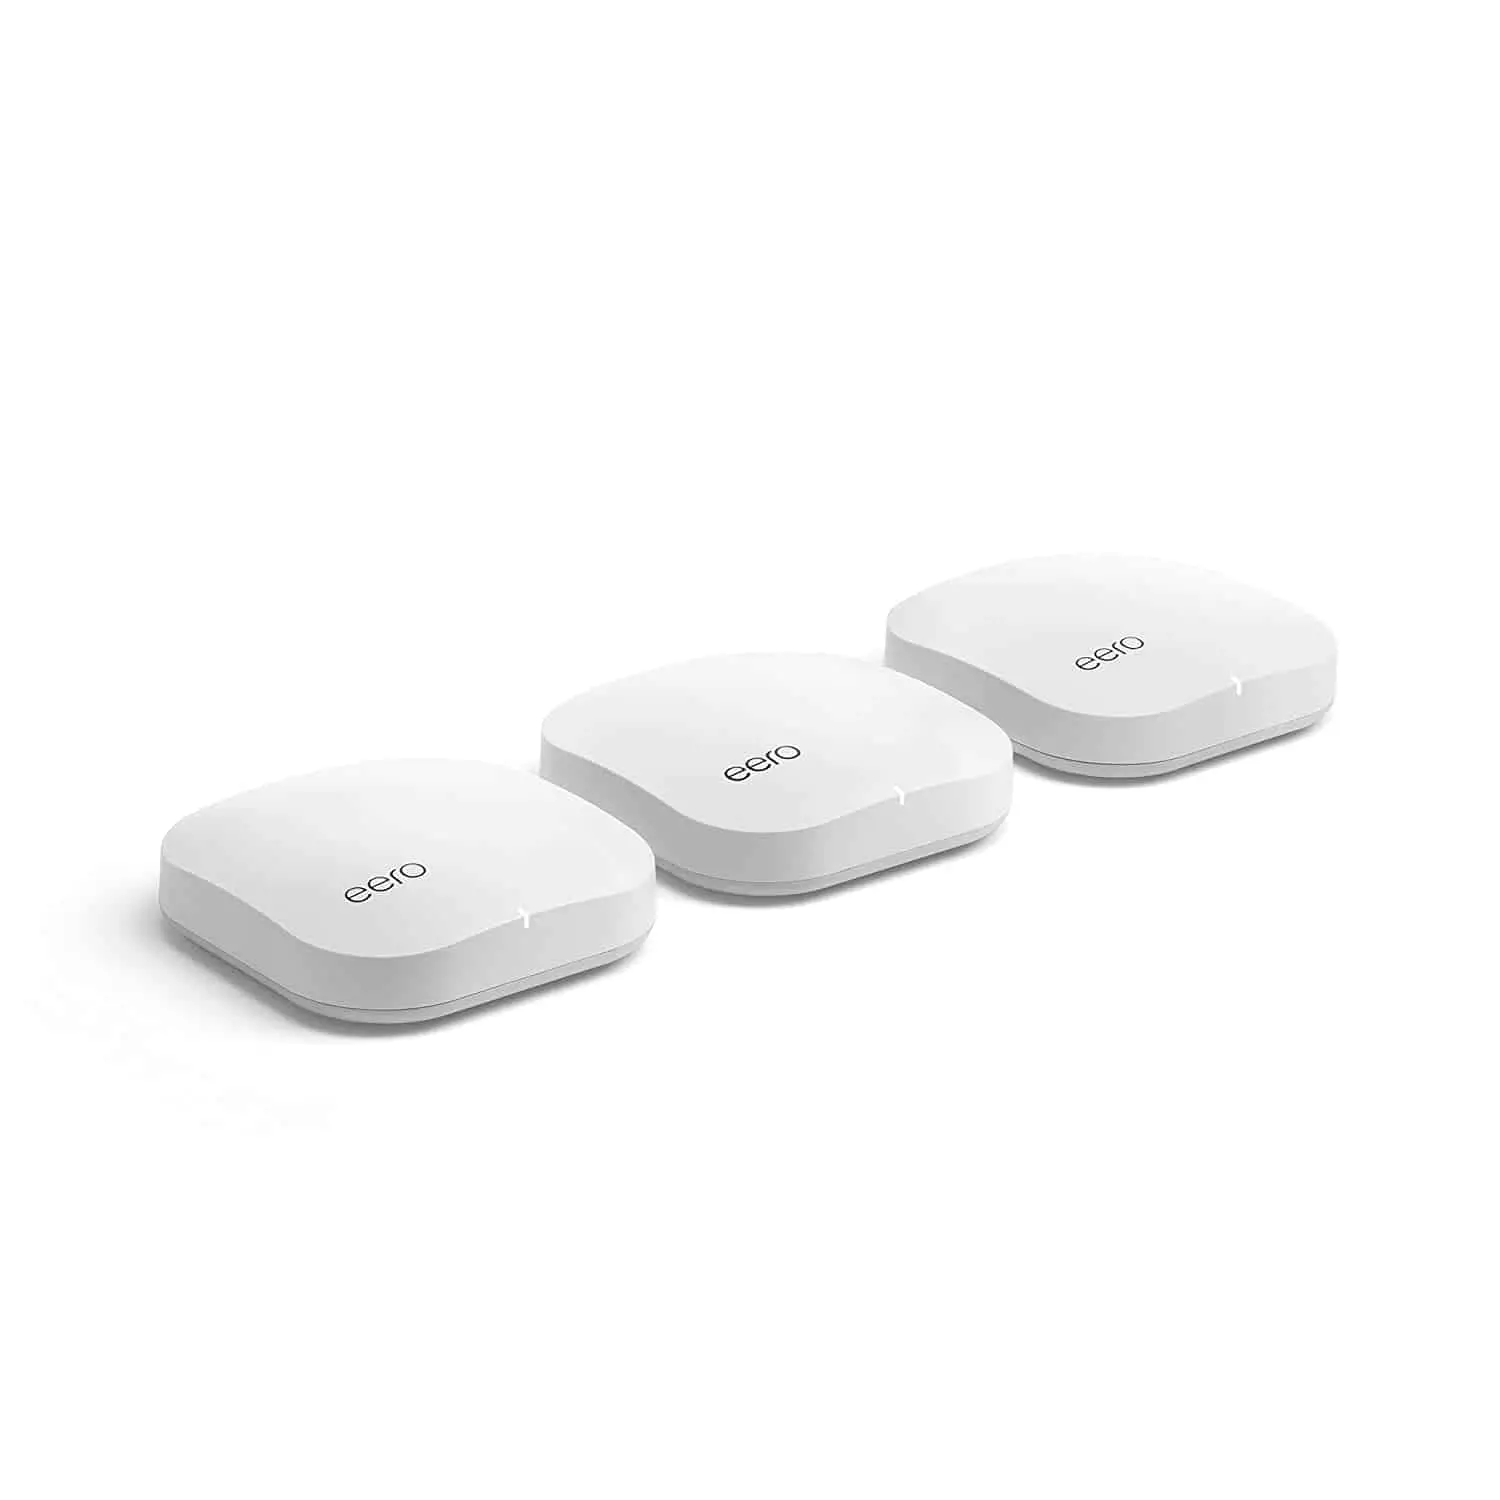 Amazon Eero Pro Mesh System: The best parental control router for coverage